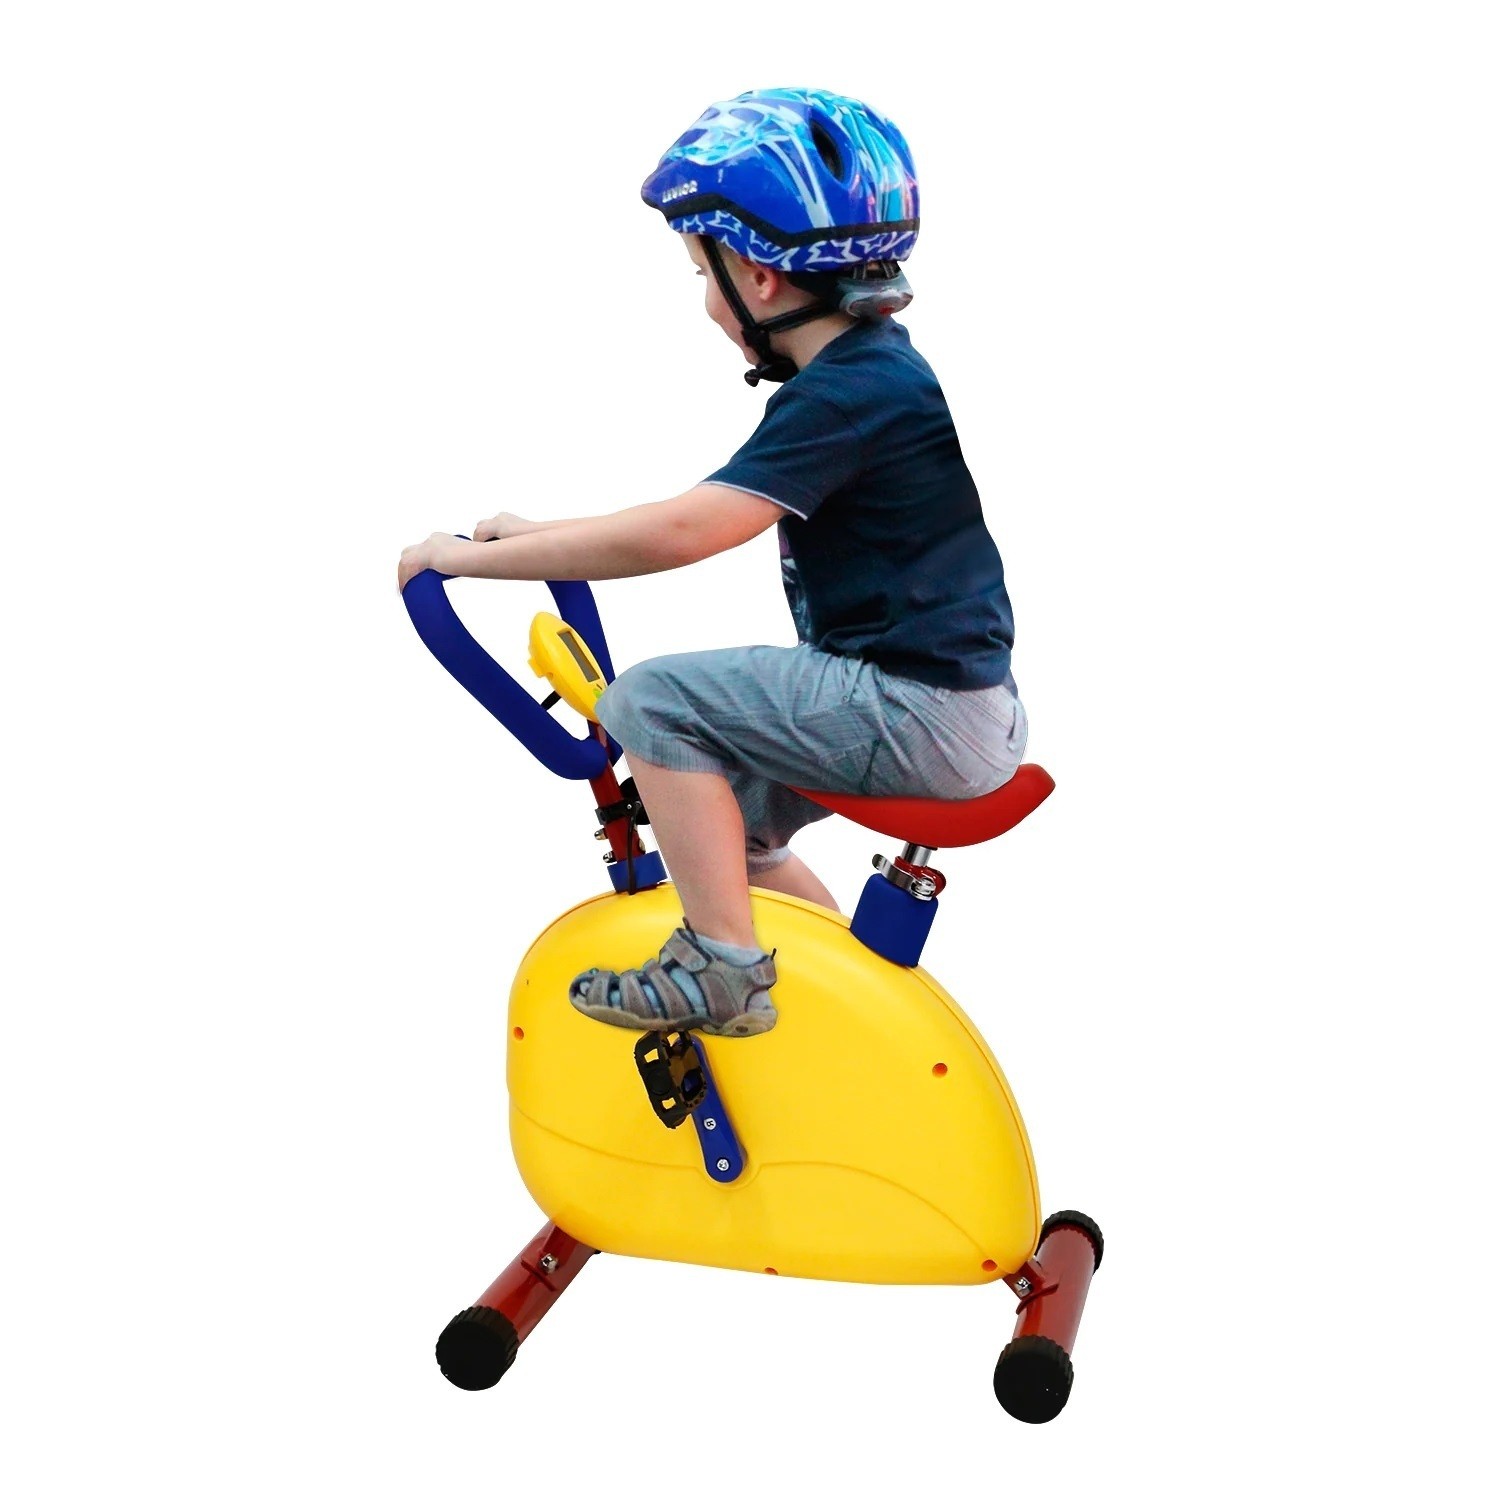 Stationary Machines for Kid size Exercise Equipment